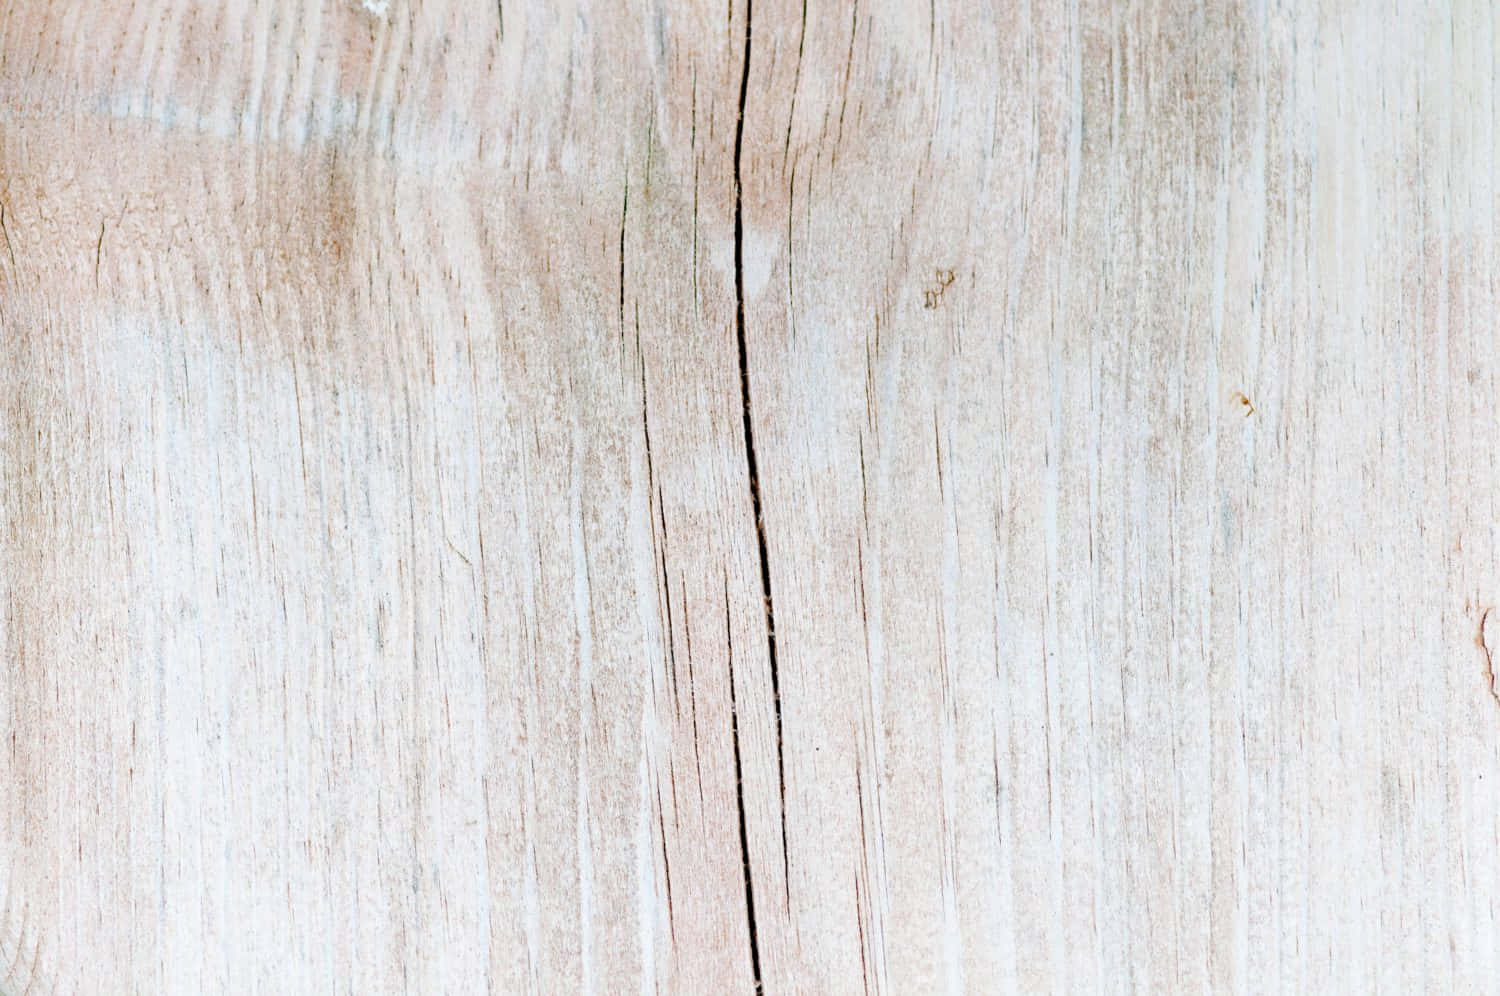 A Close Up Of A Wooden Board